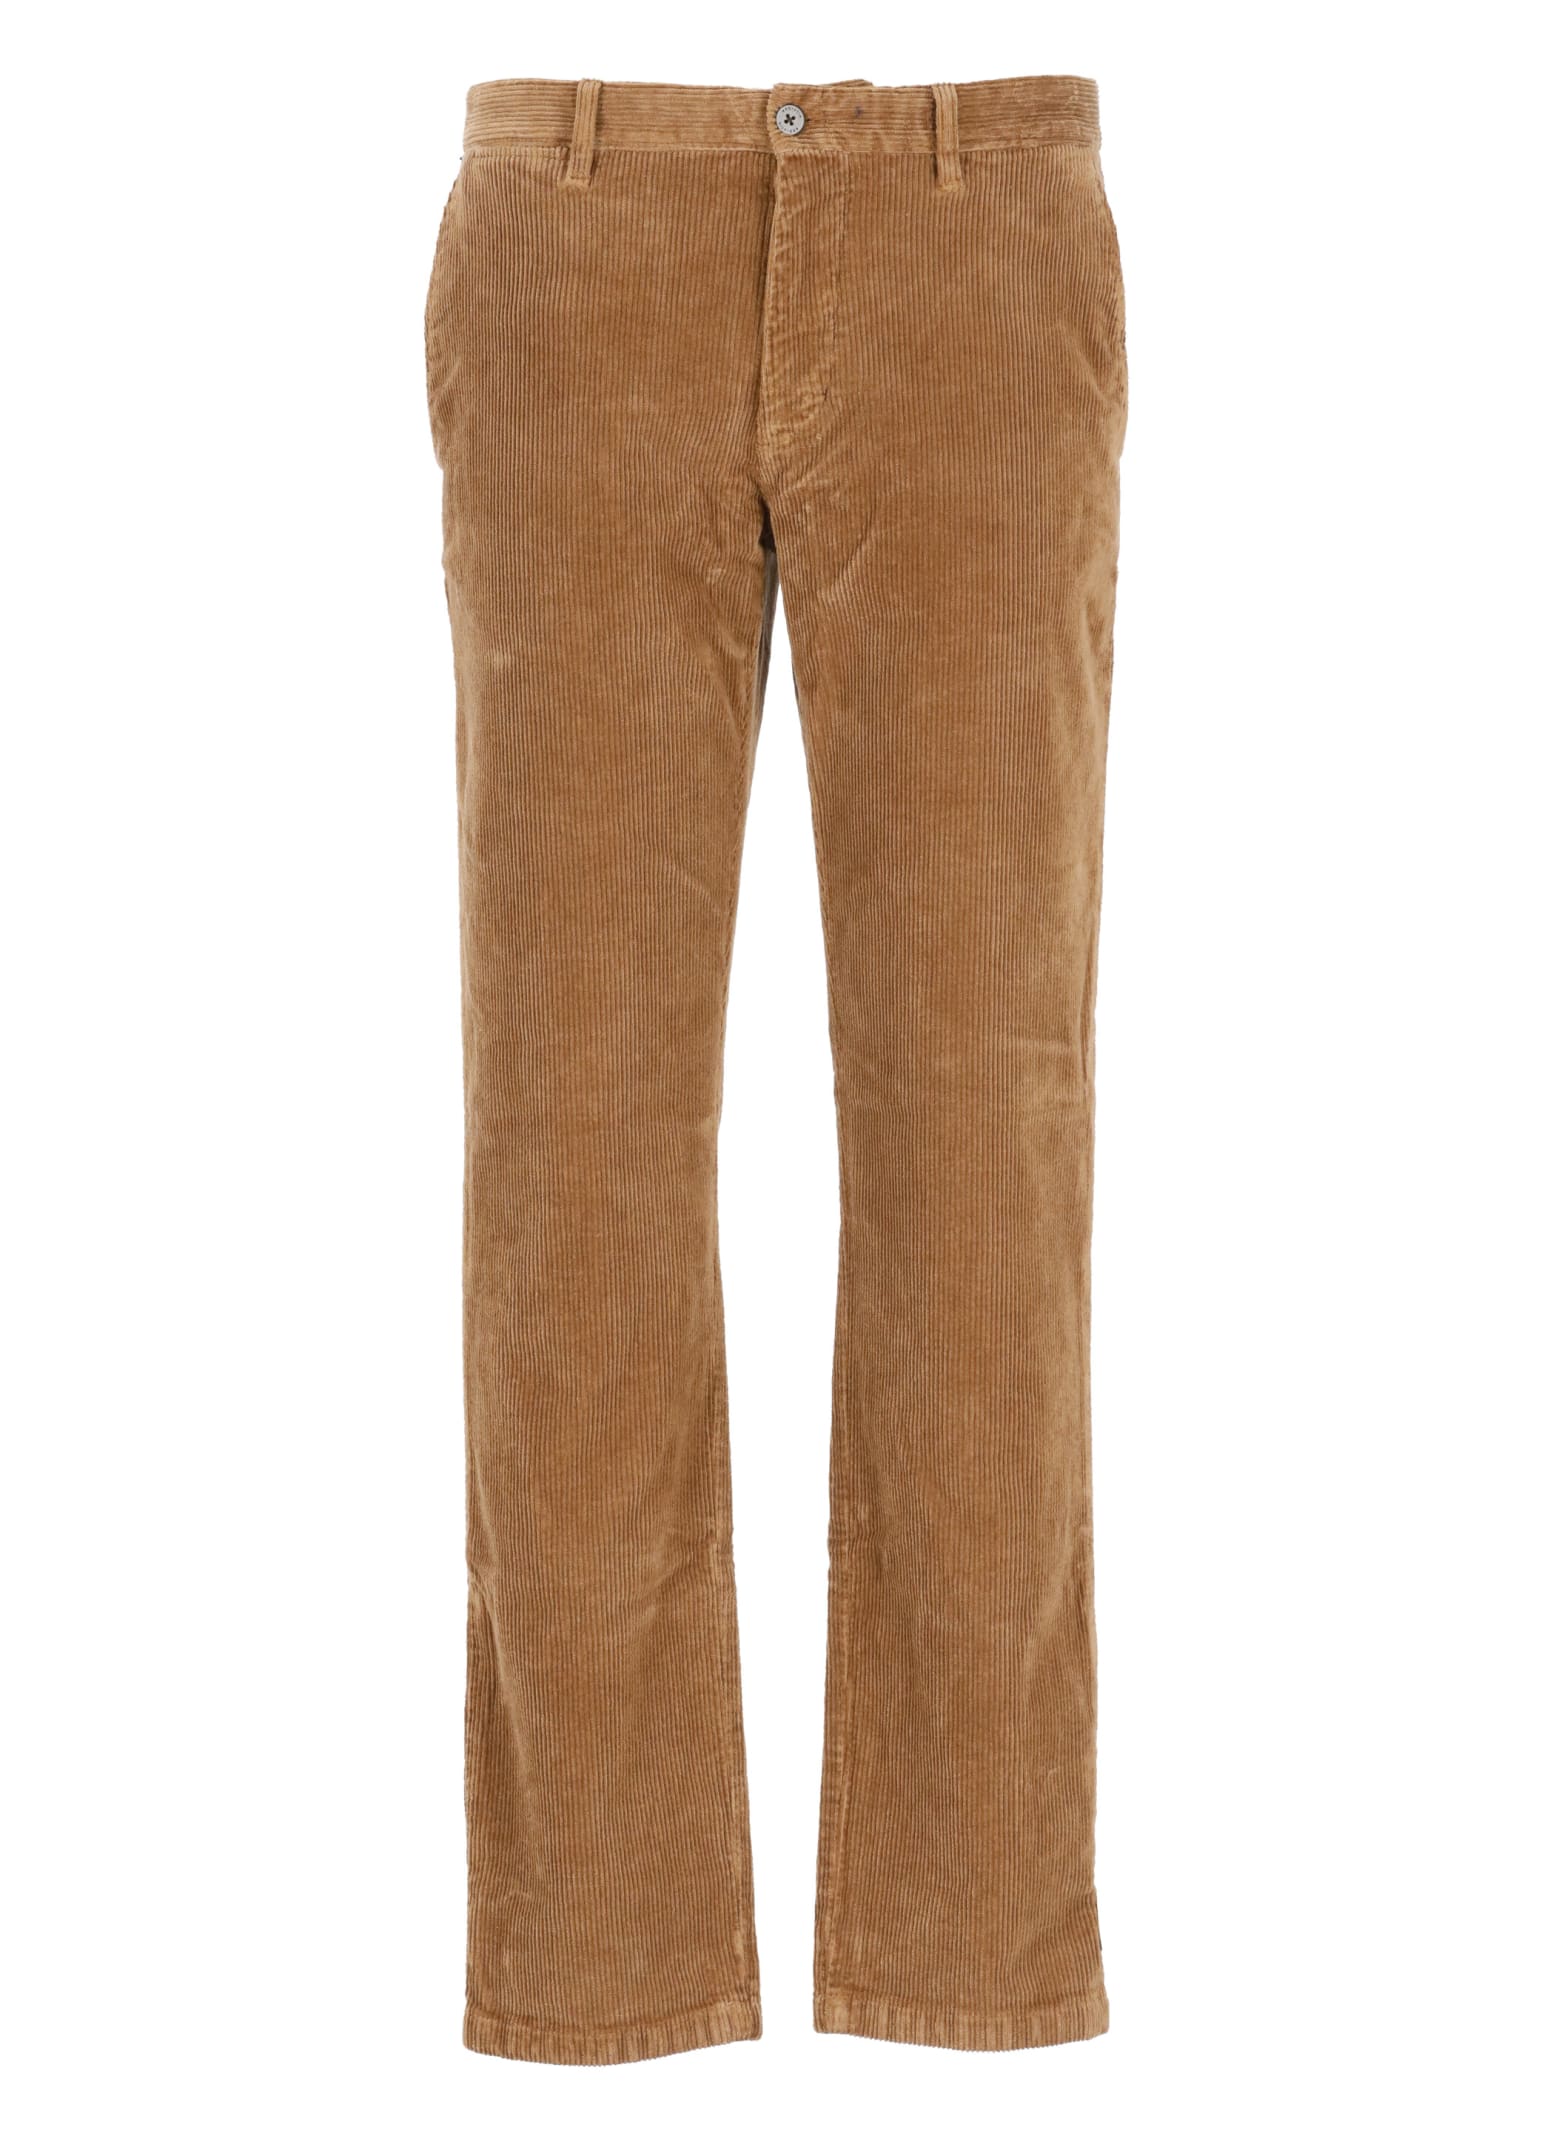 Tommy Hilfiger Denton Trousers